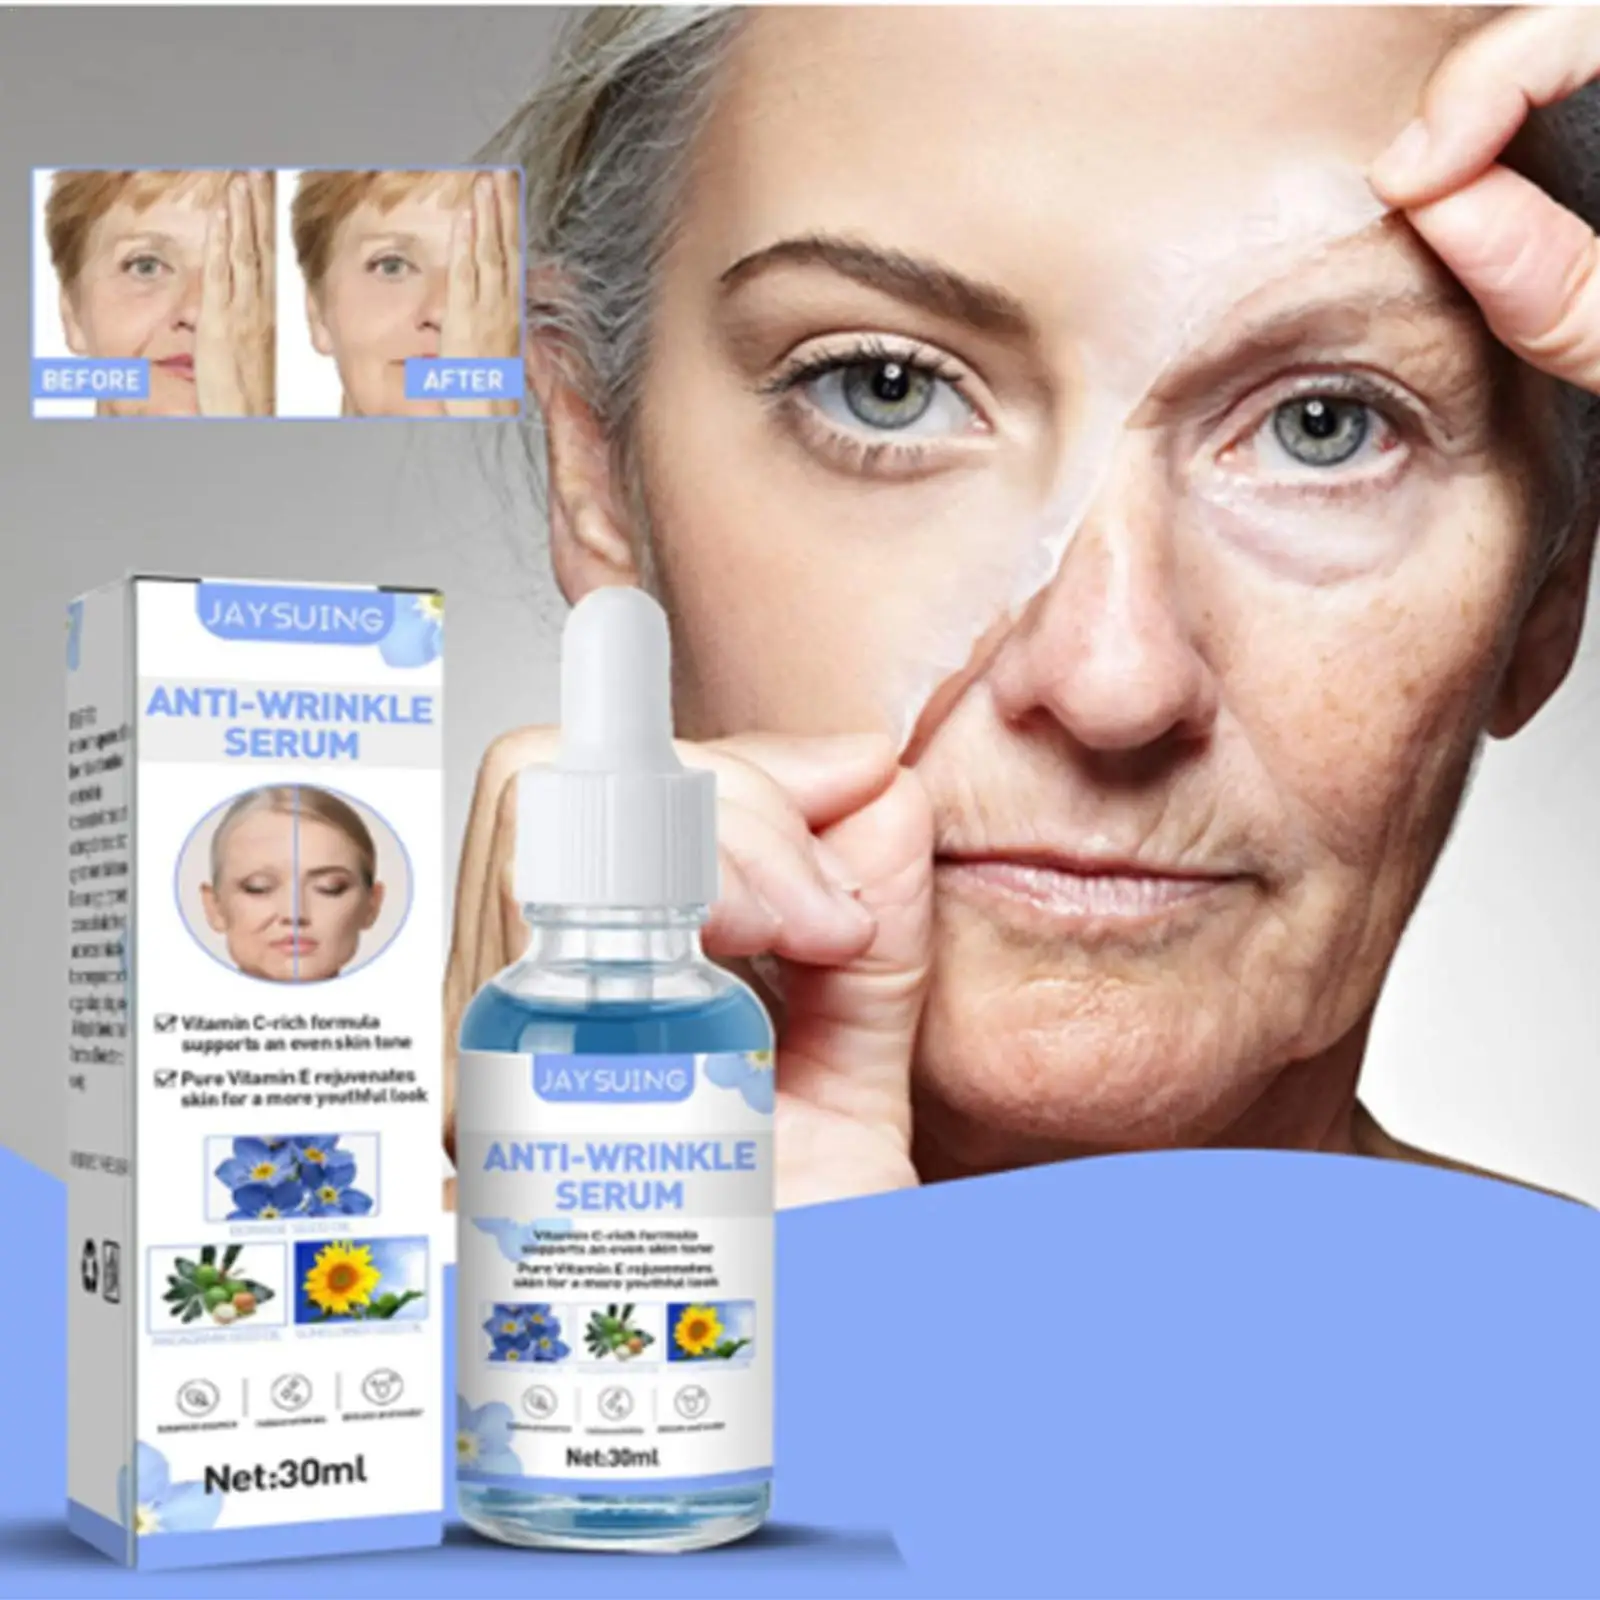 

30ml Anti-Aging Serum Face Serum Firm Moisturize Tender Skin Smoothes Fine Lines Wrinkles Borage Seed Oil Skin Care Products